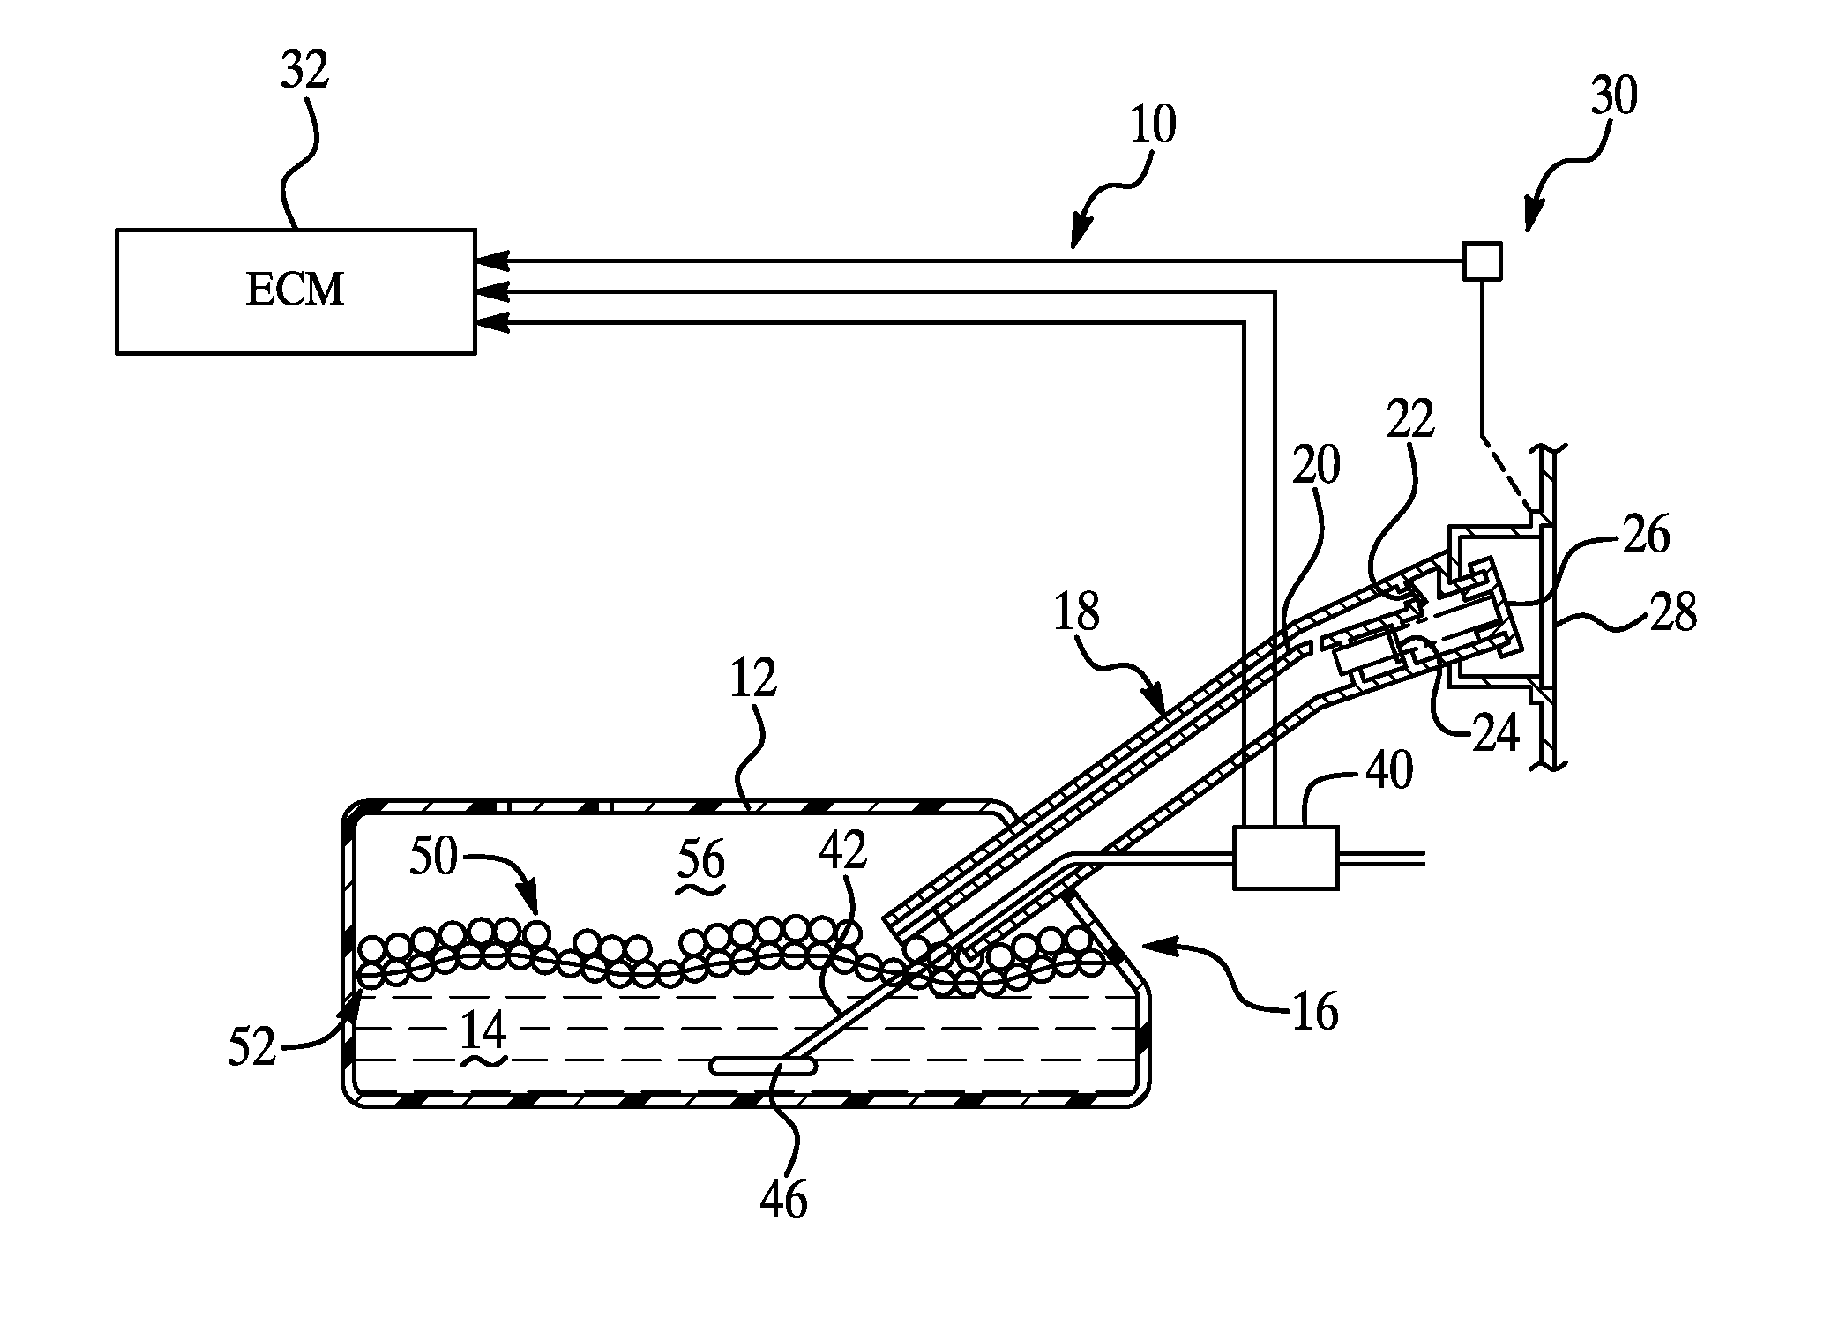 Fuel vapor management for stored fuel using floating particles